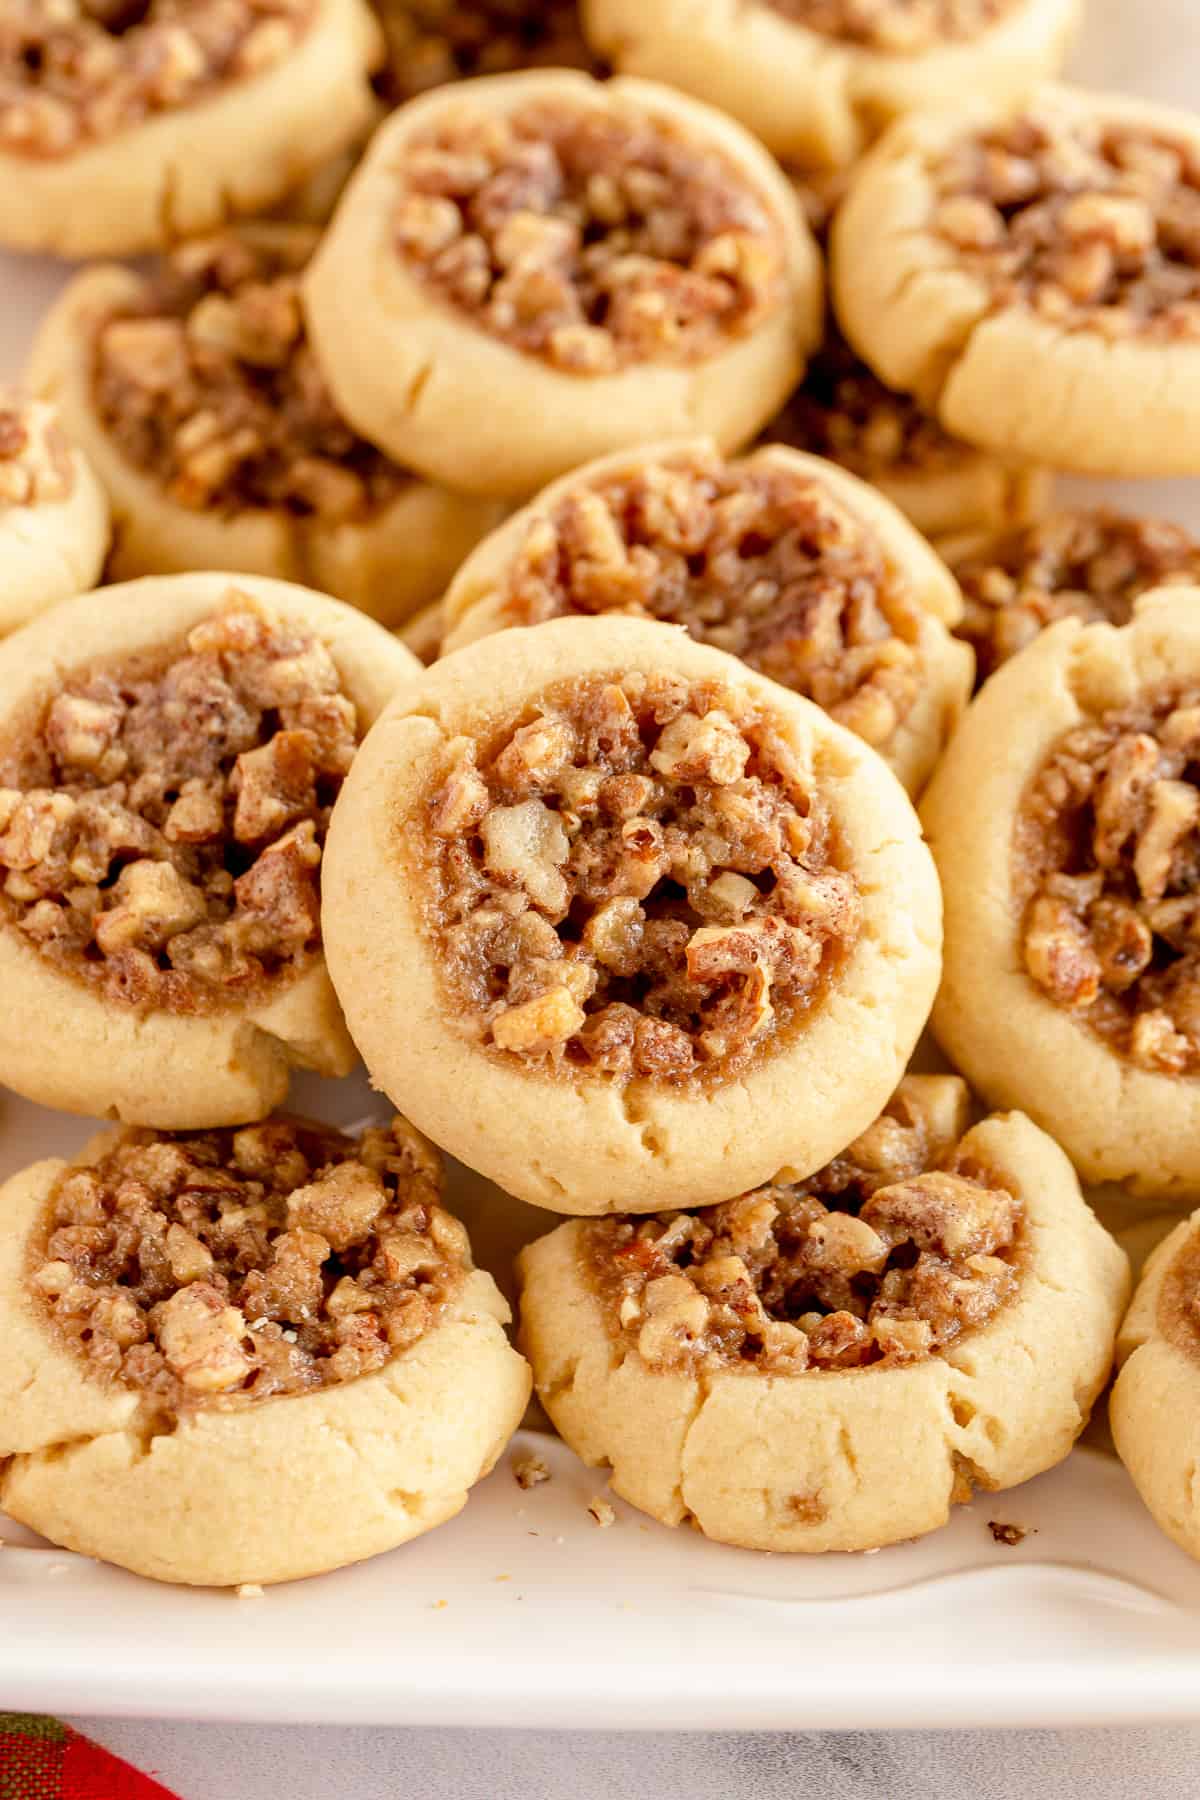 A close up of thumbprint cookies filled with a pecan mixture on a white platter.